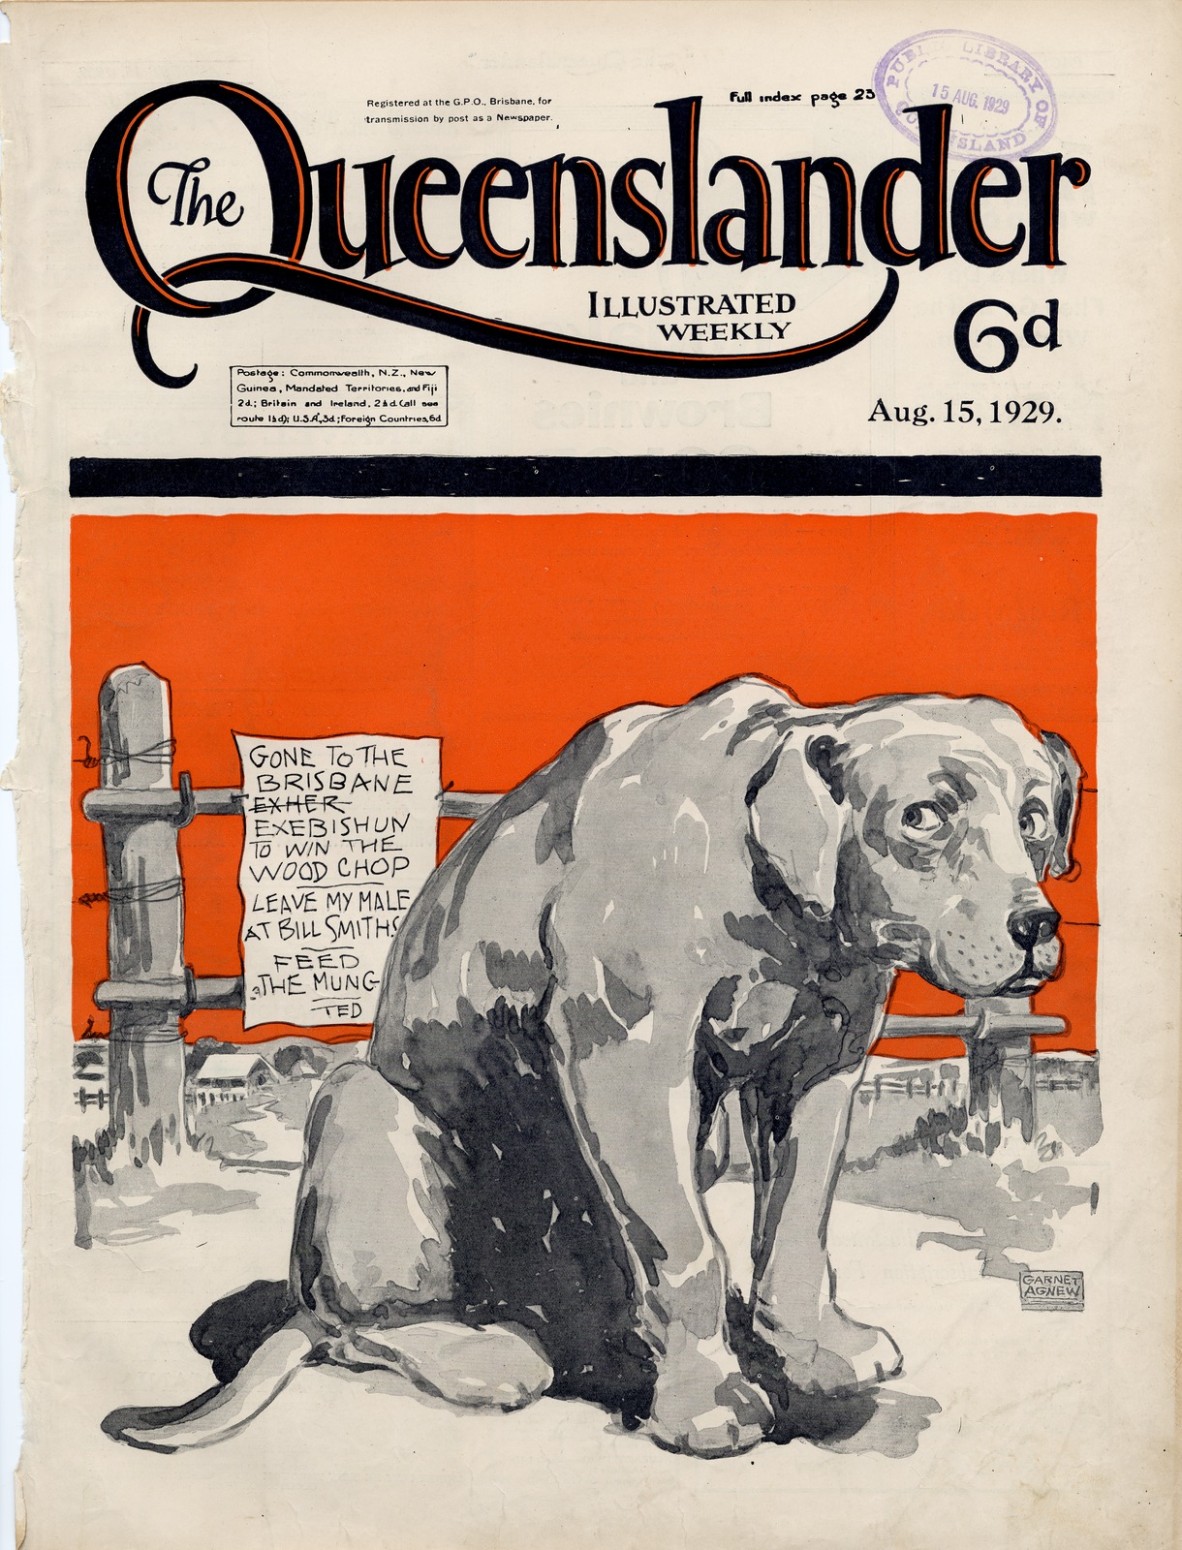 Illustrated front cover from The Queenslander August 15 1929